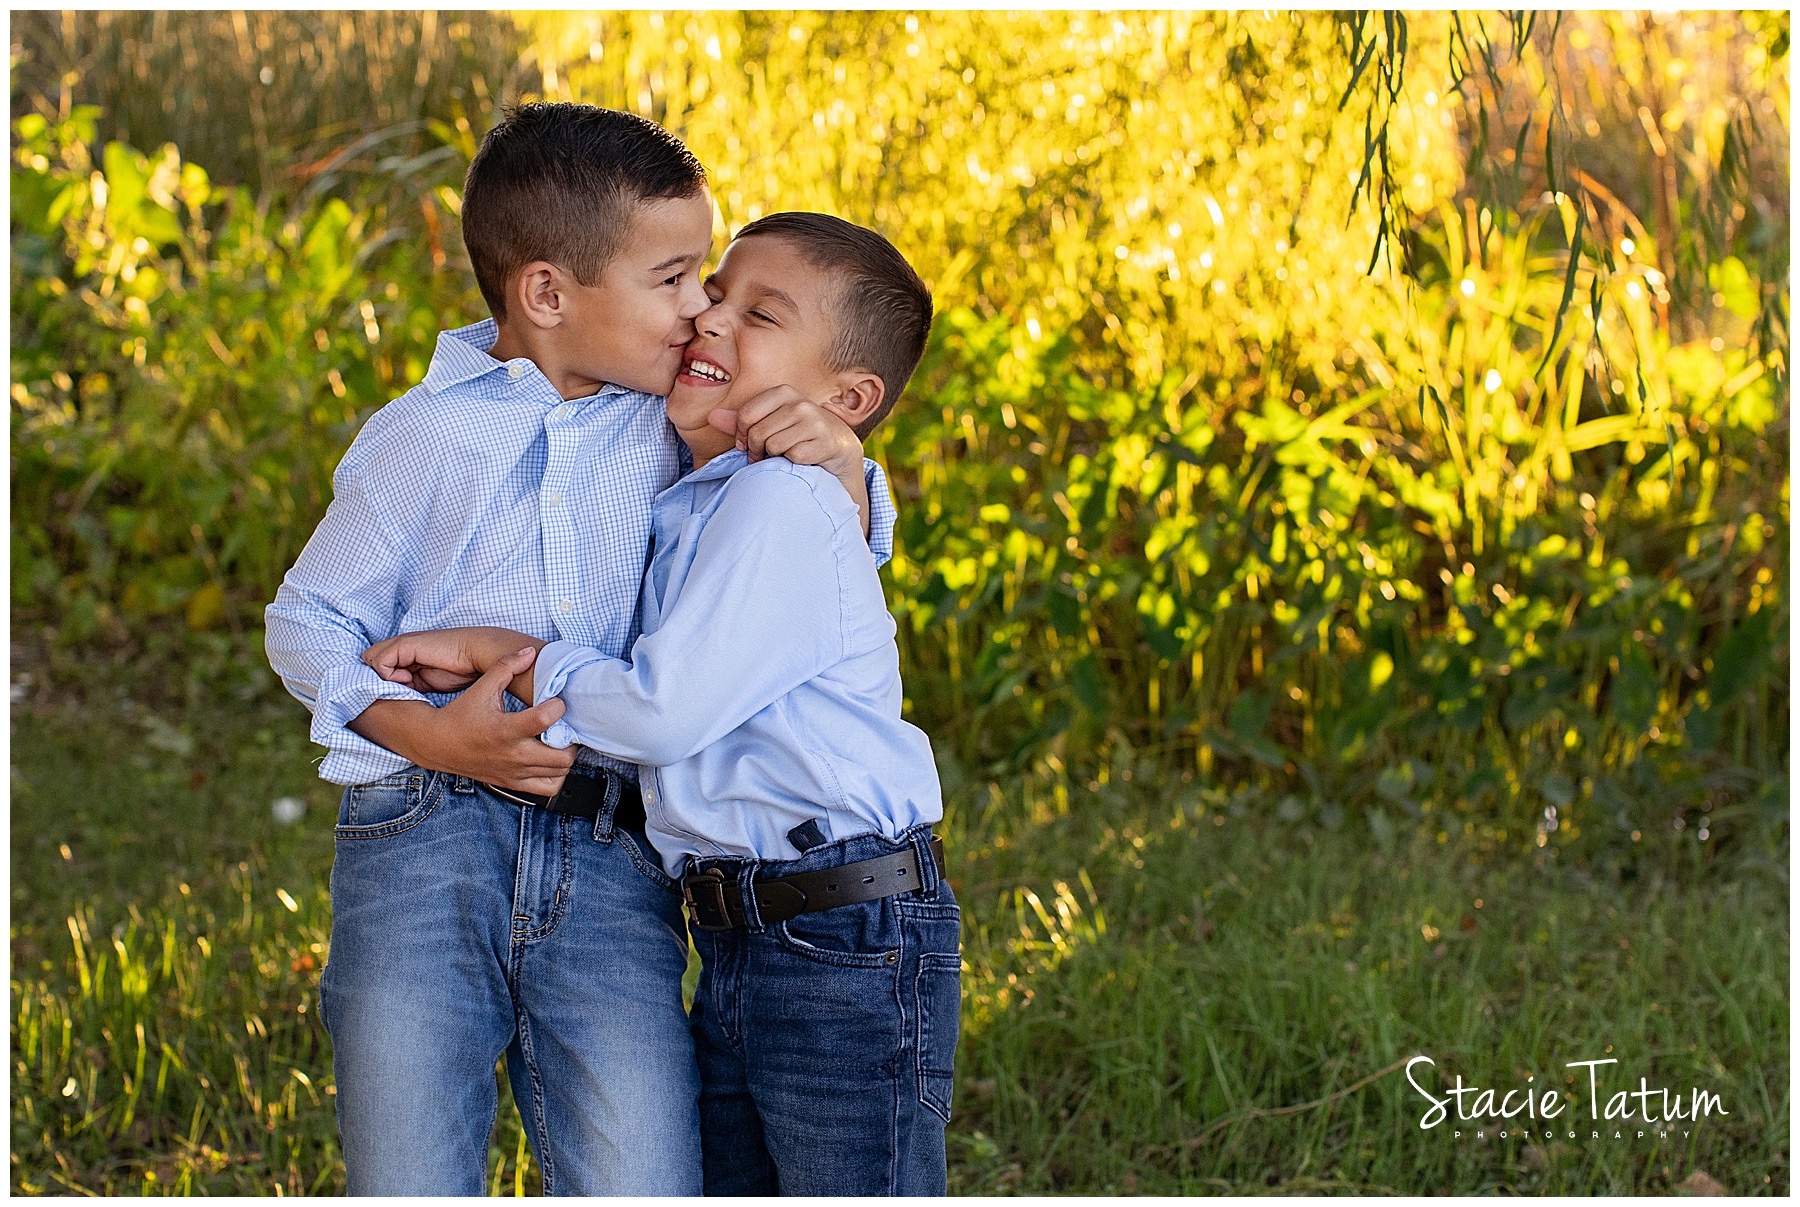 Dallas Family Photographer Session with mom dad and two brothers